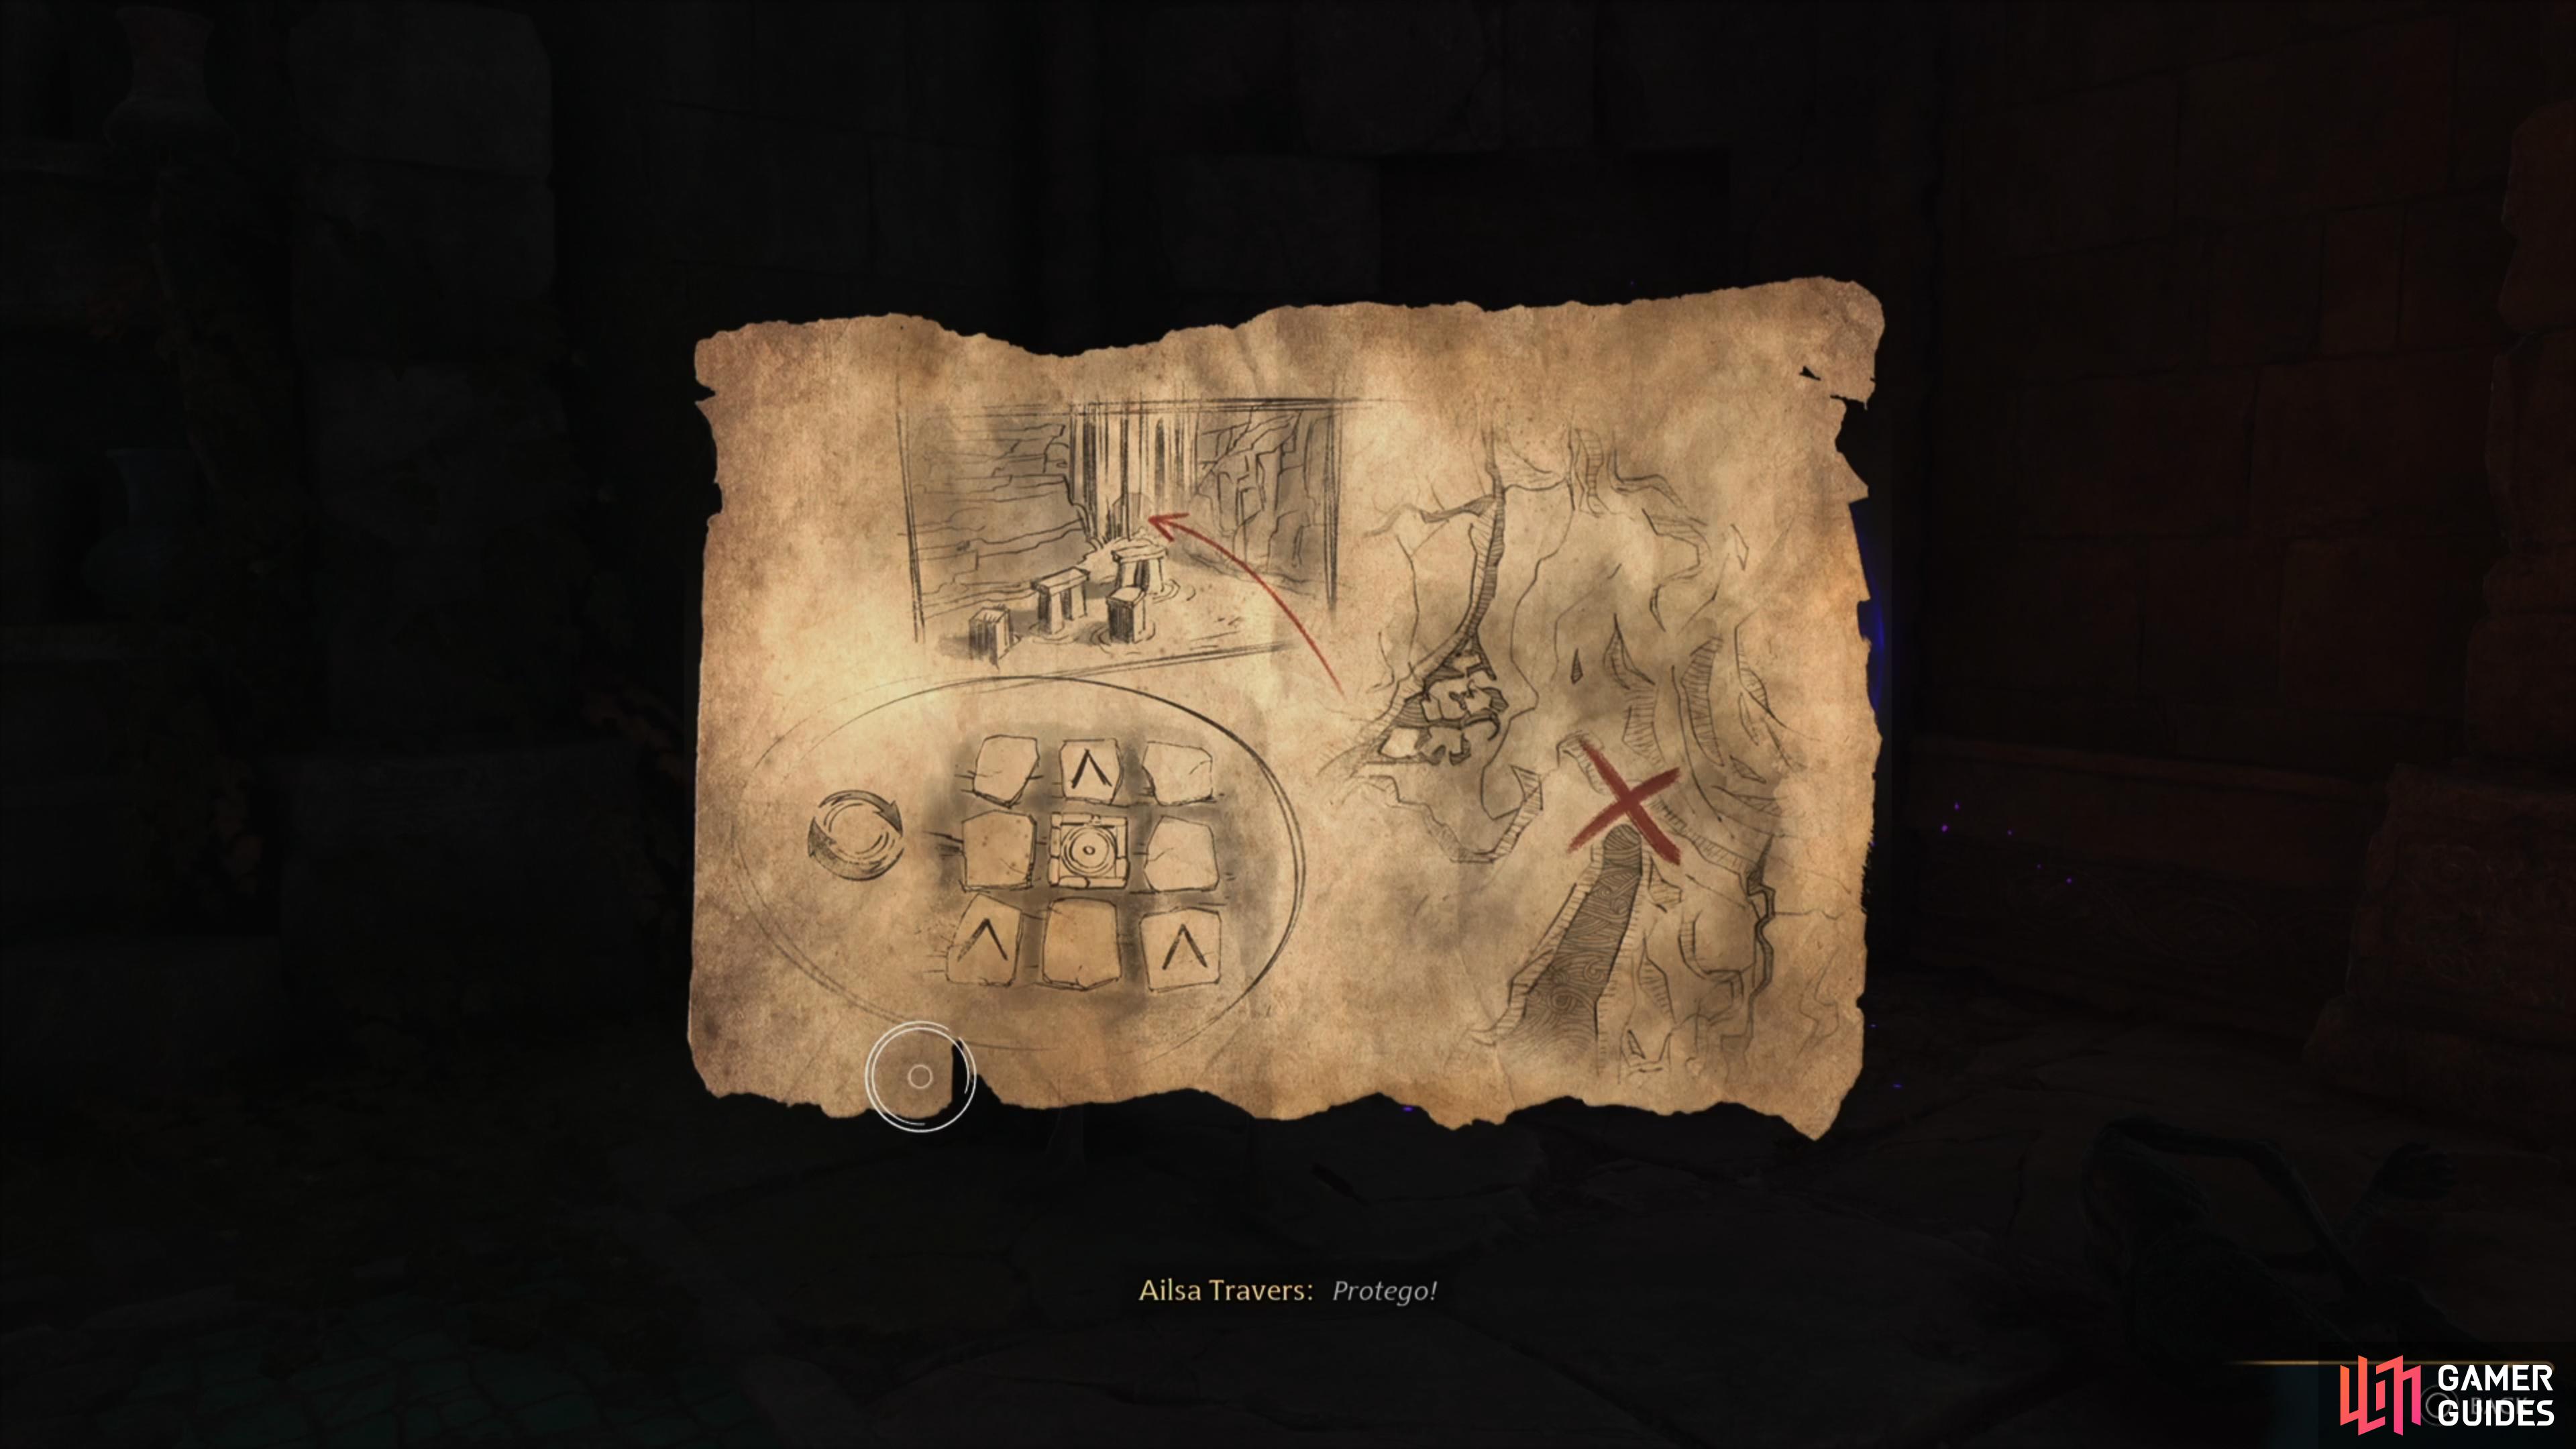 Collect the Mysterious Map Fragment to begin the quest.